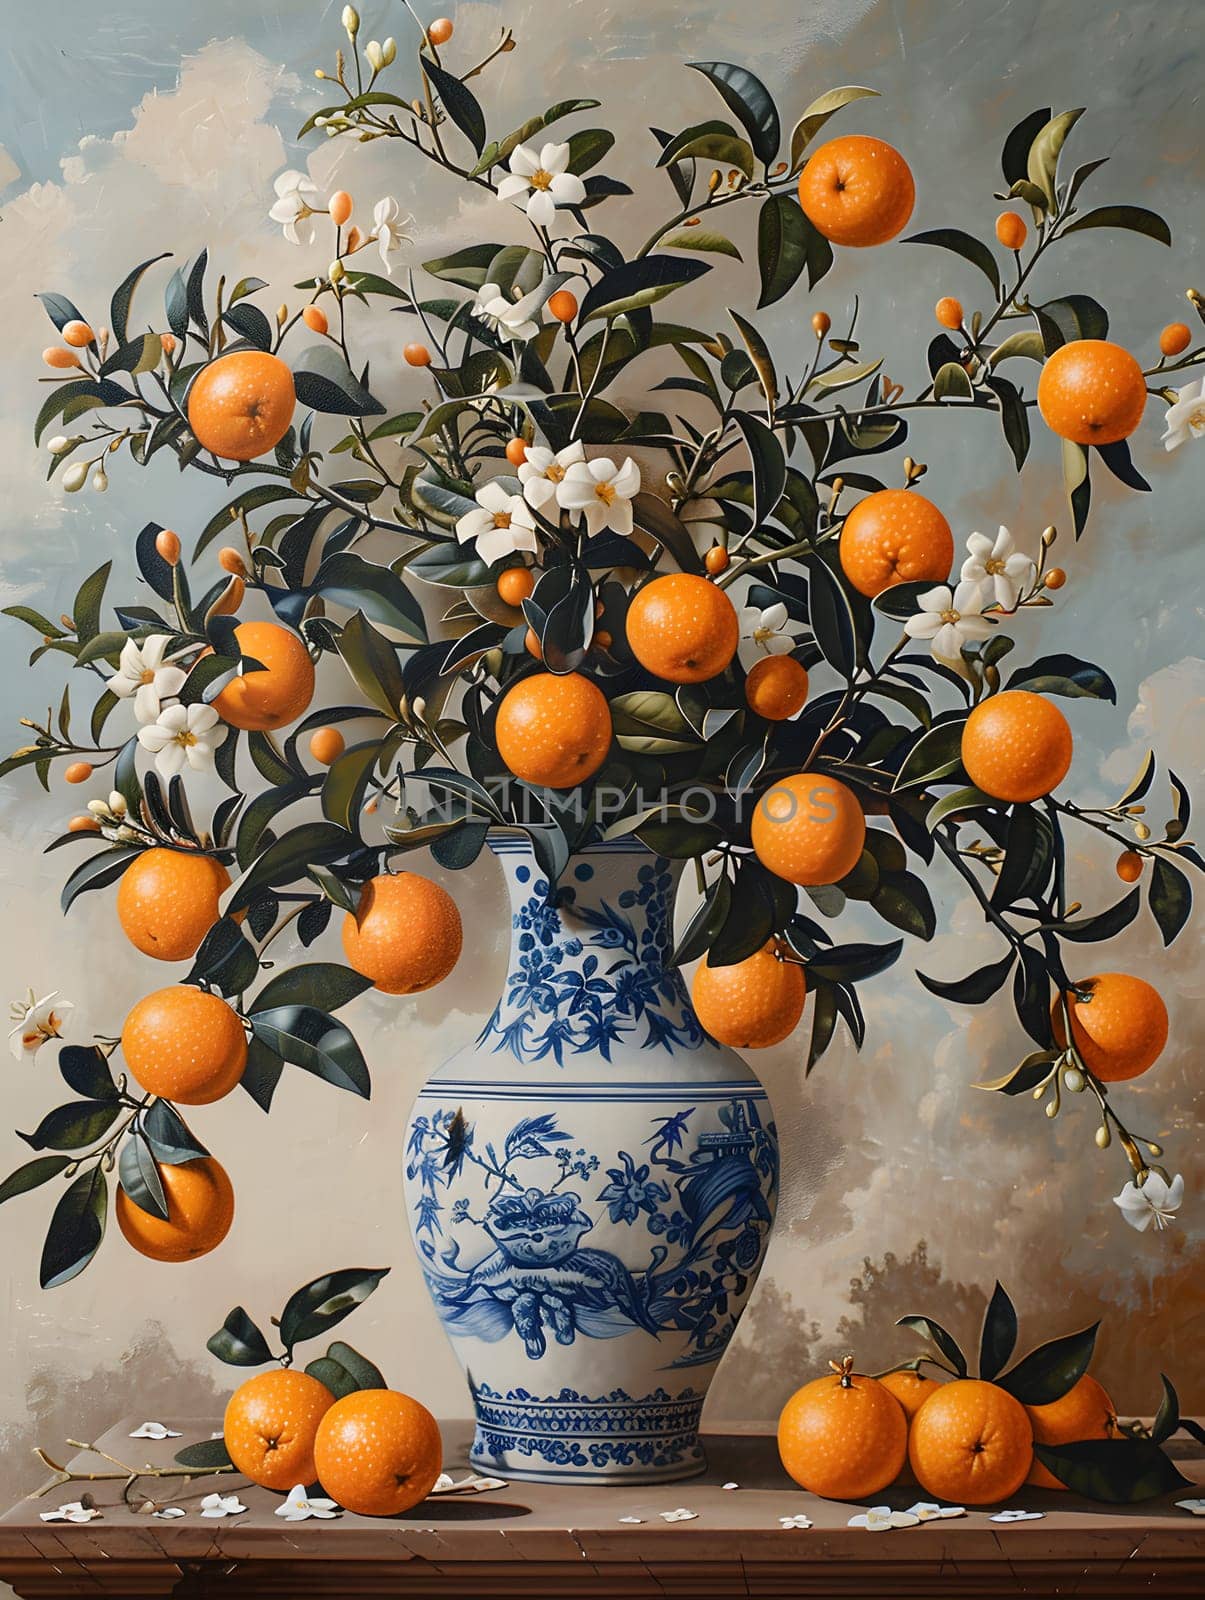 A beautiful blue and white vase filled with a mix of oranges and flowers, including Rangpur, Clementine, Valencia, and Bitter oranges. A colorful display of natural foods and plant decorations